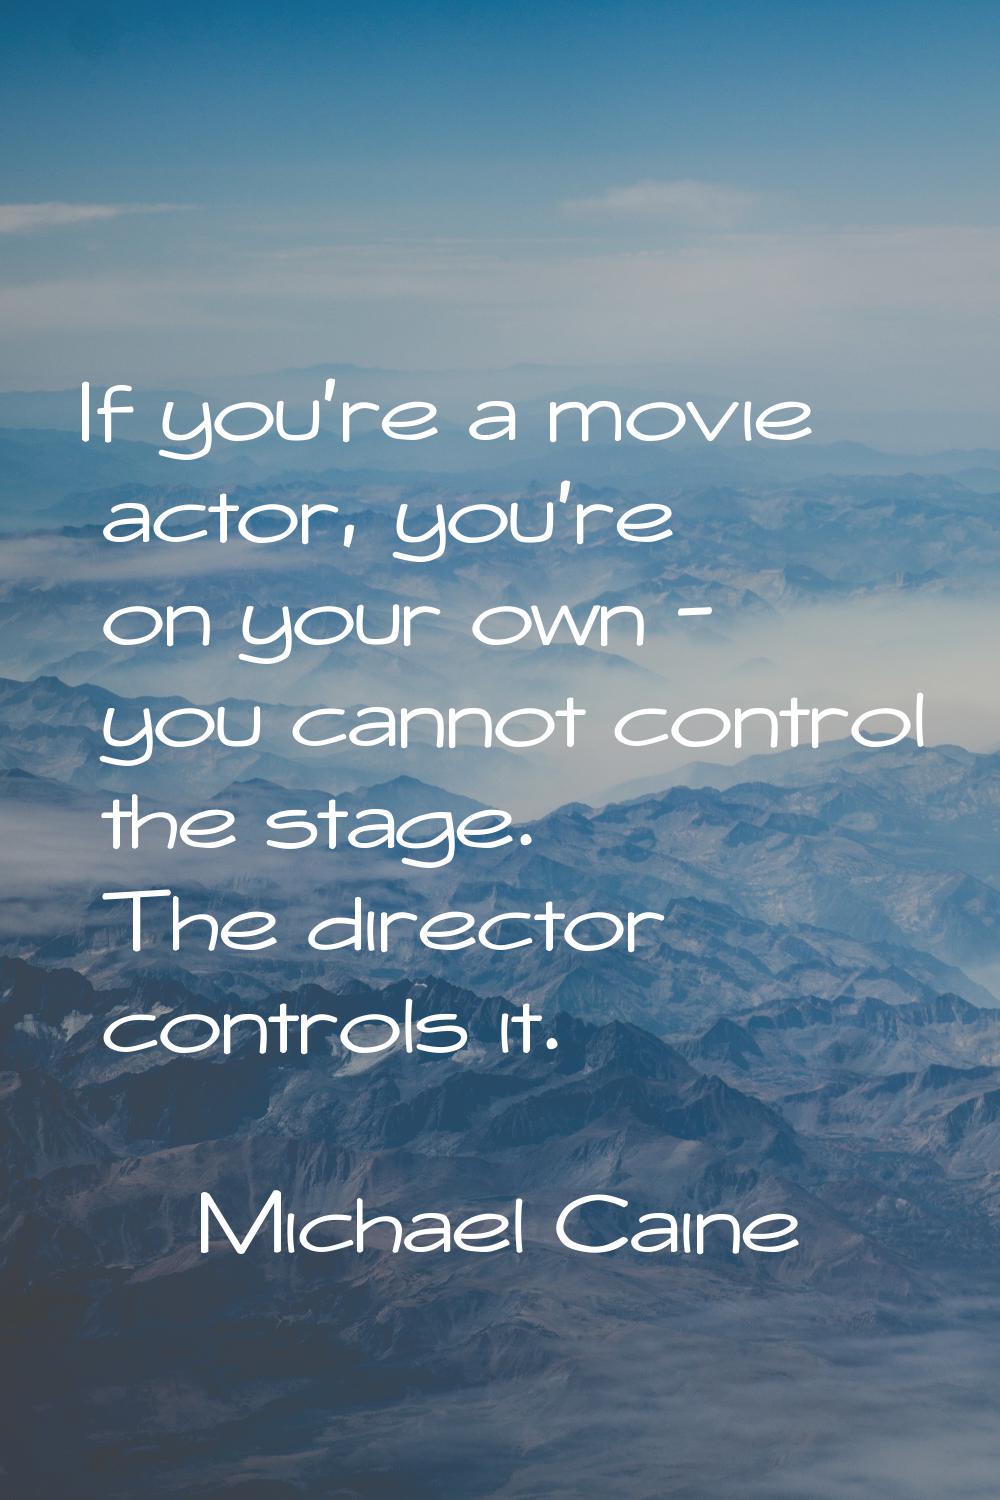 If you're a movie actor, you're on your own - you cannot control the stage. The director controls i